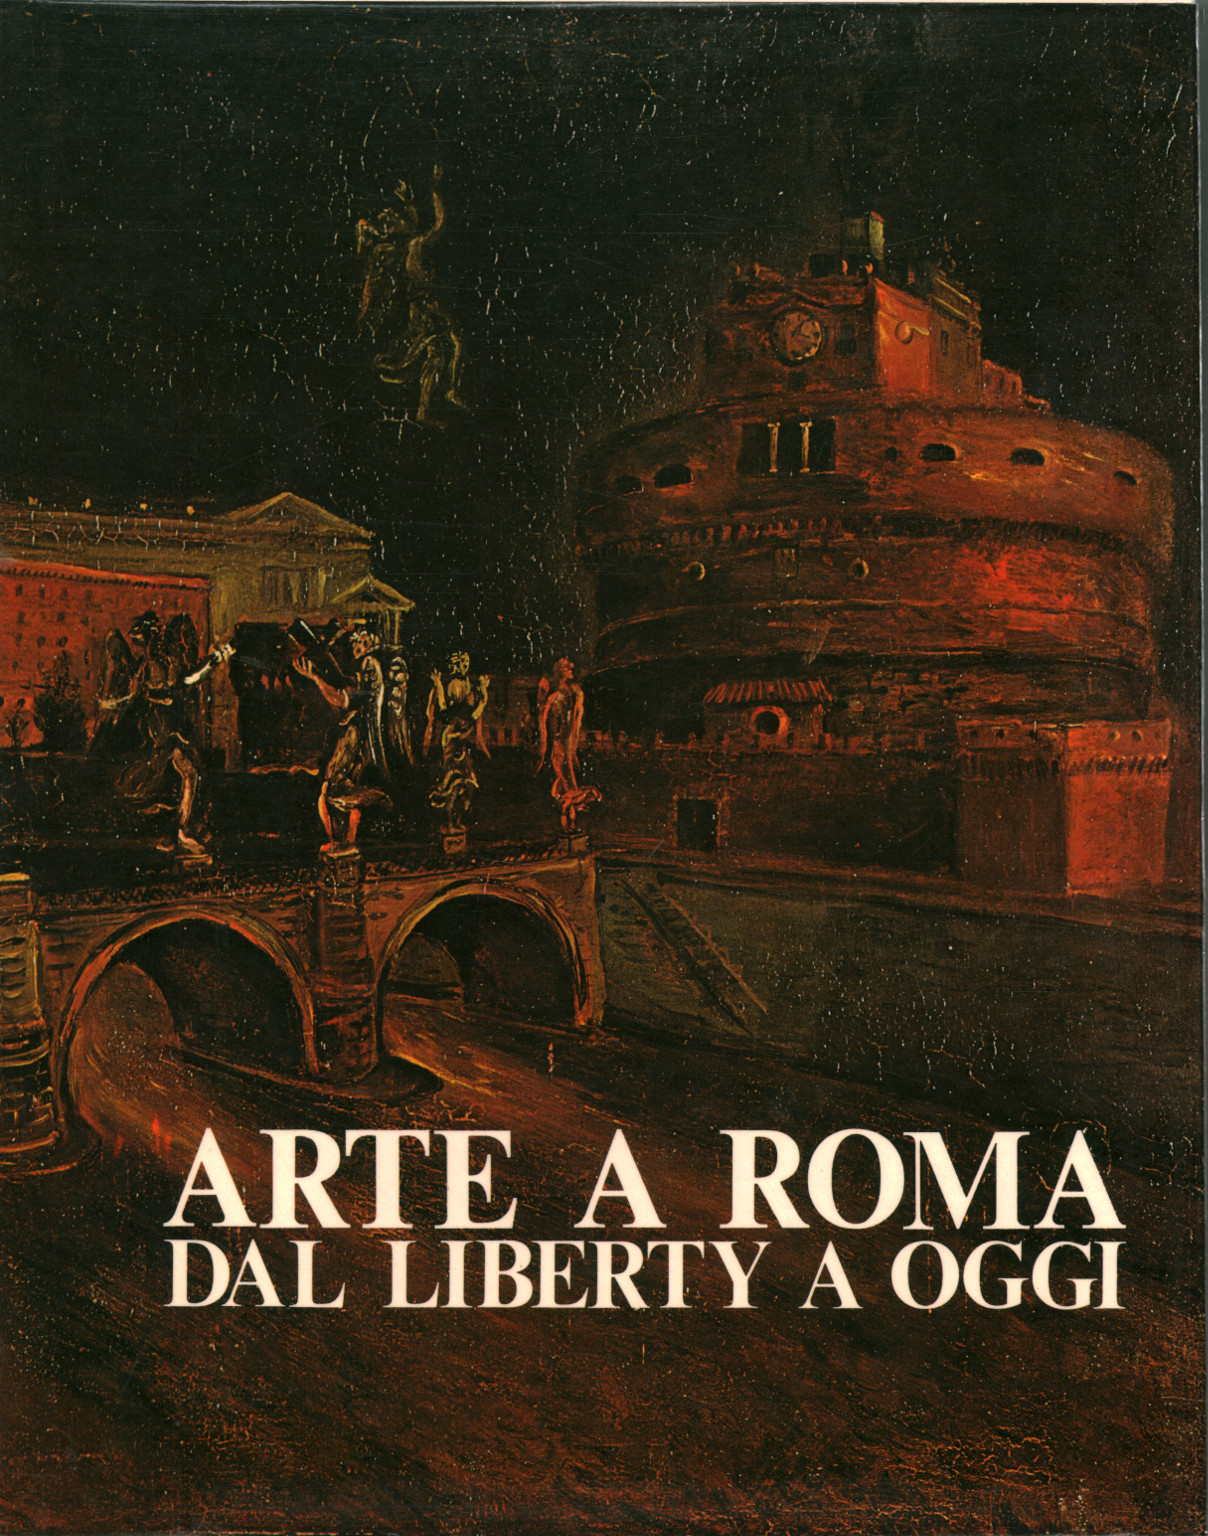 Art in Rome from Art Nouveau to today